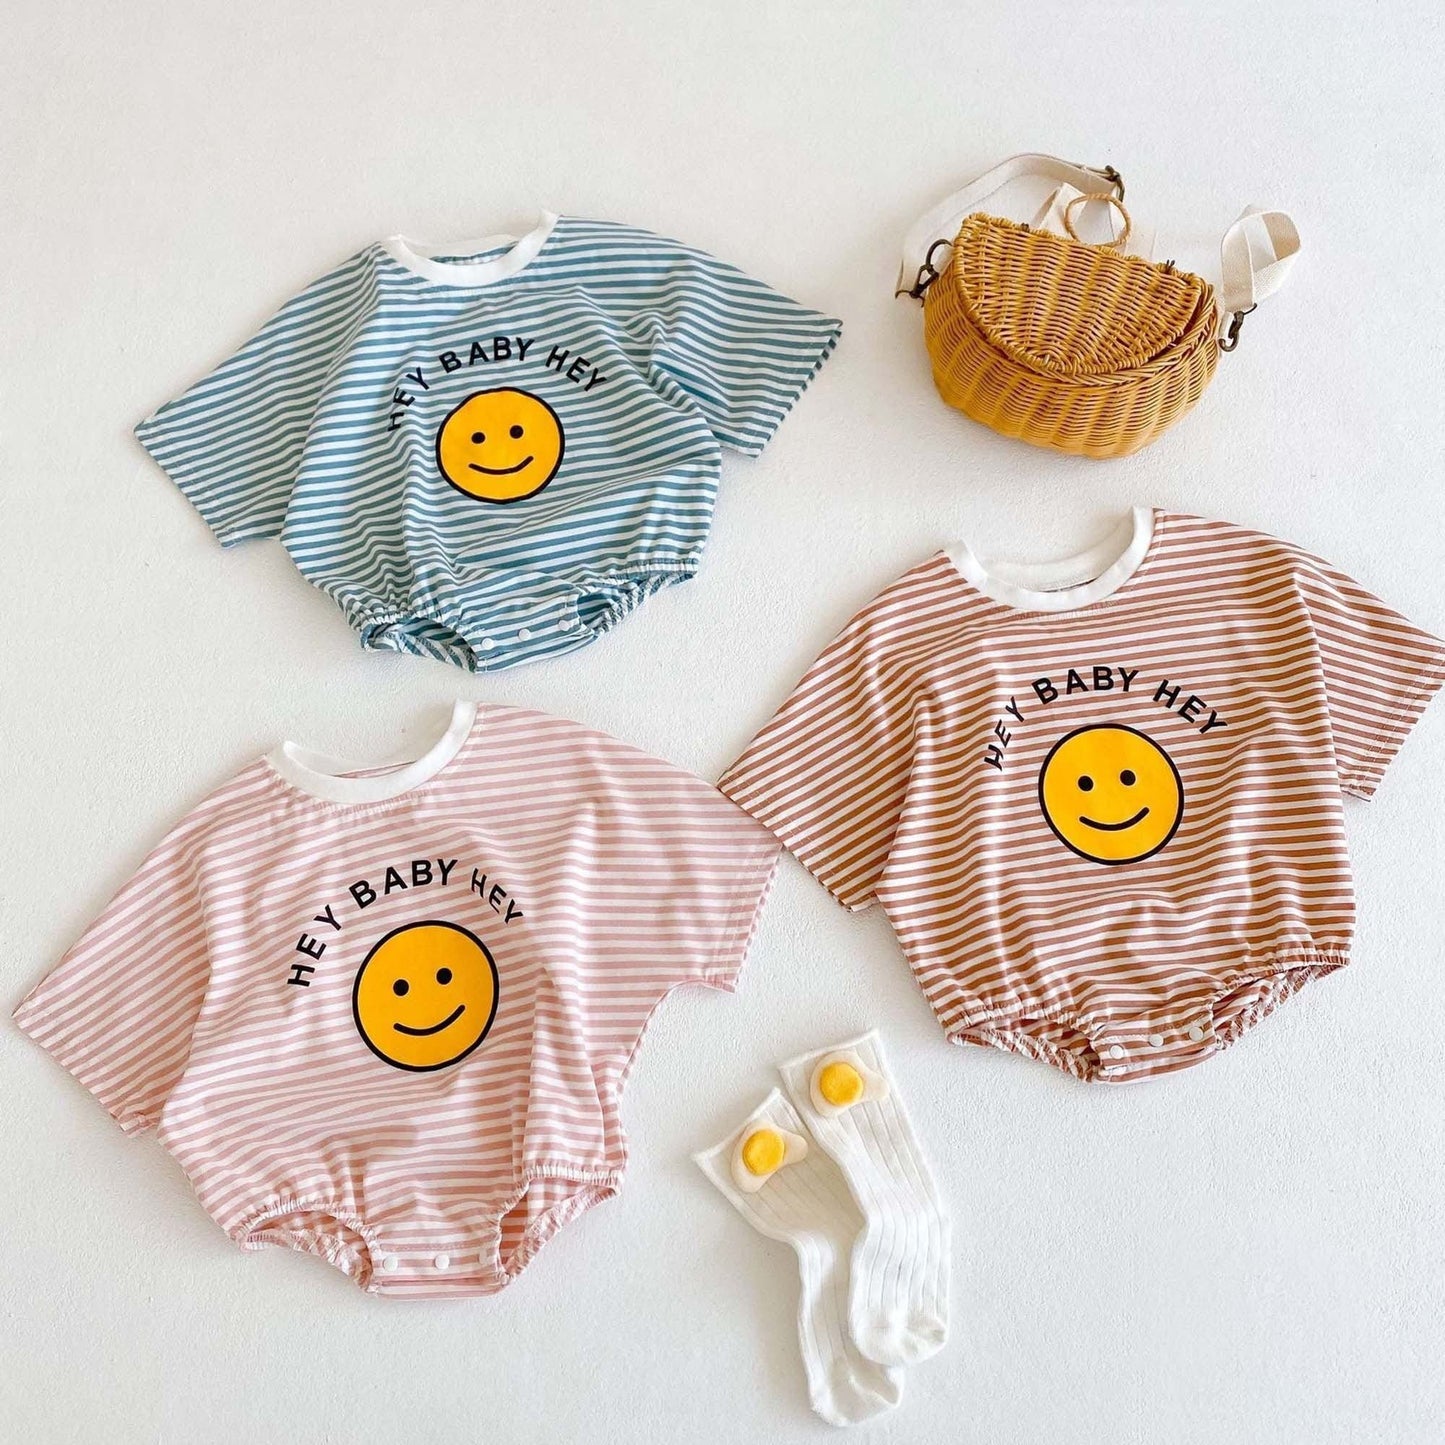 Baby sweatshirt with smiley face available in 3 colors